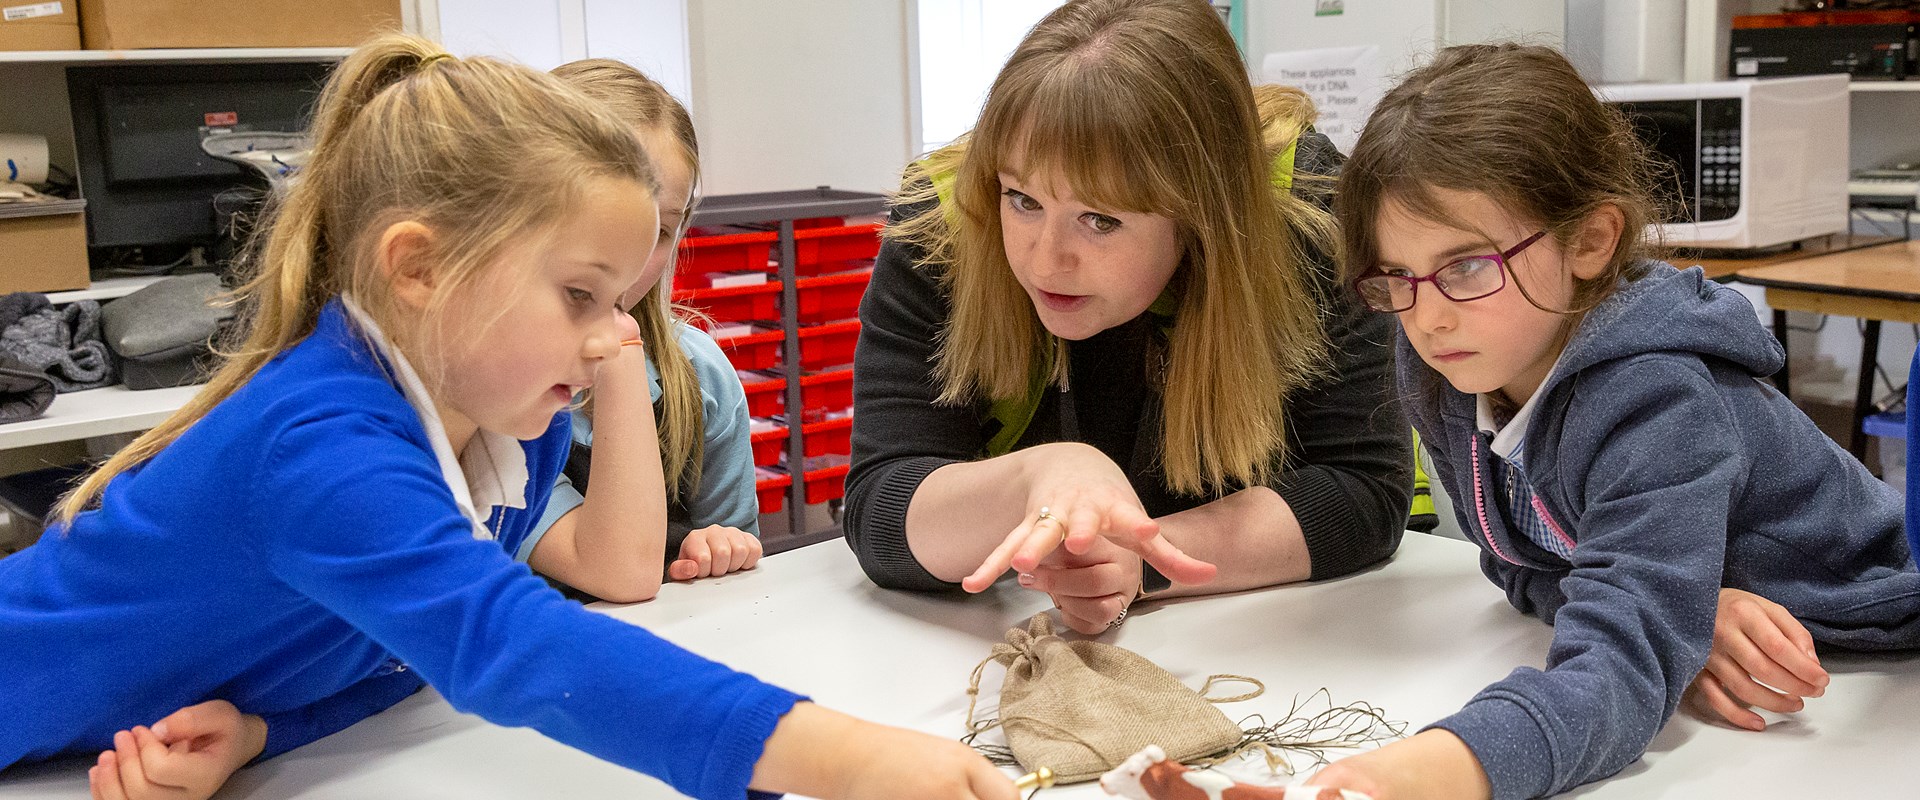 A member of education staff is surrounded by three pupils looking at roman objects on a table. 